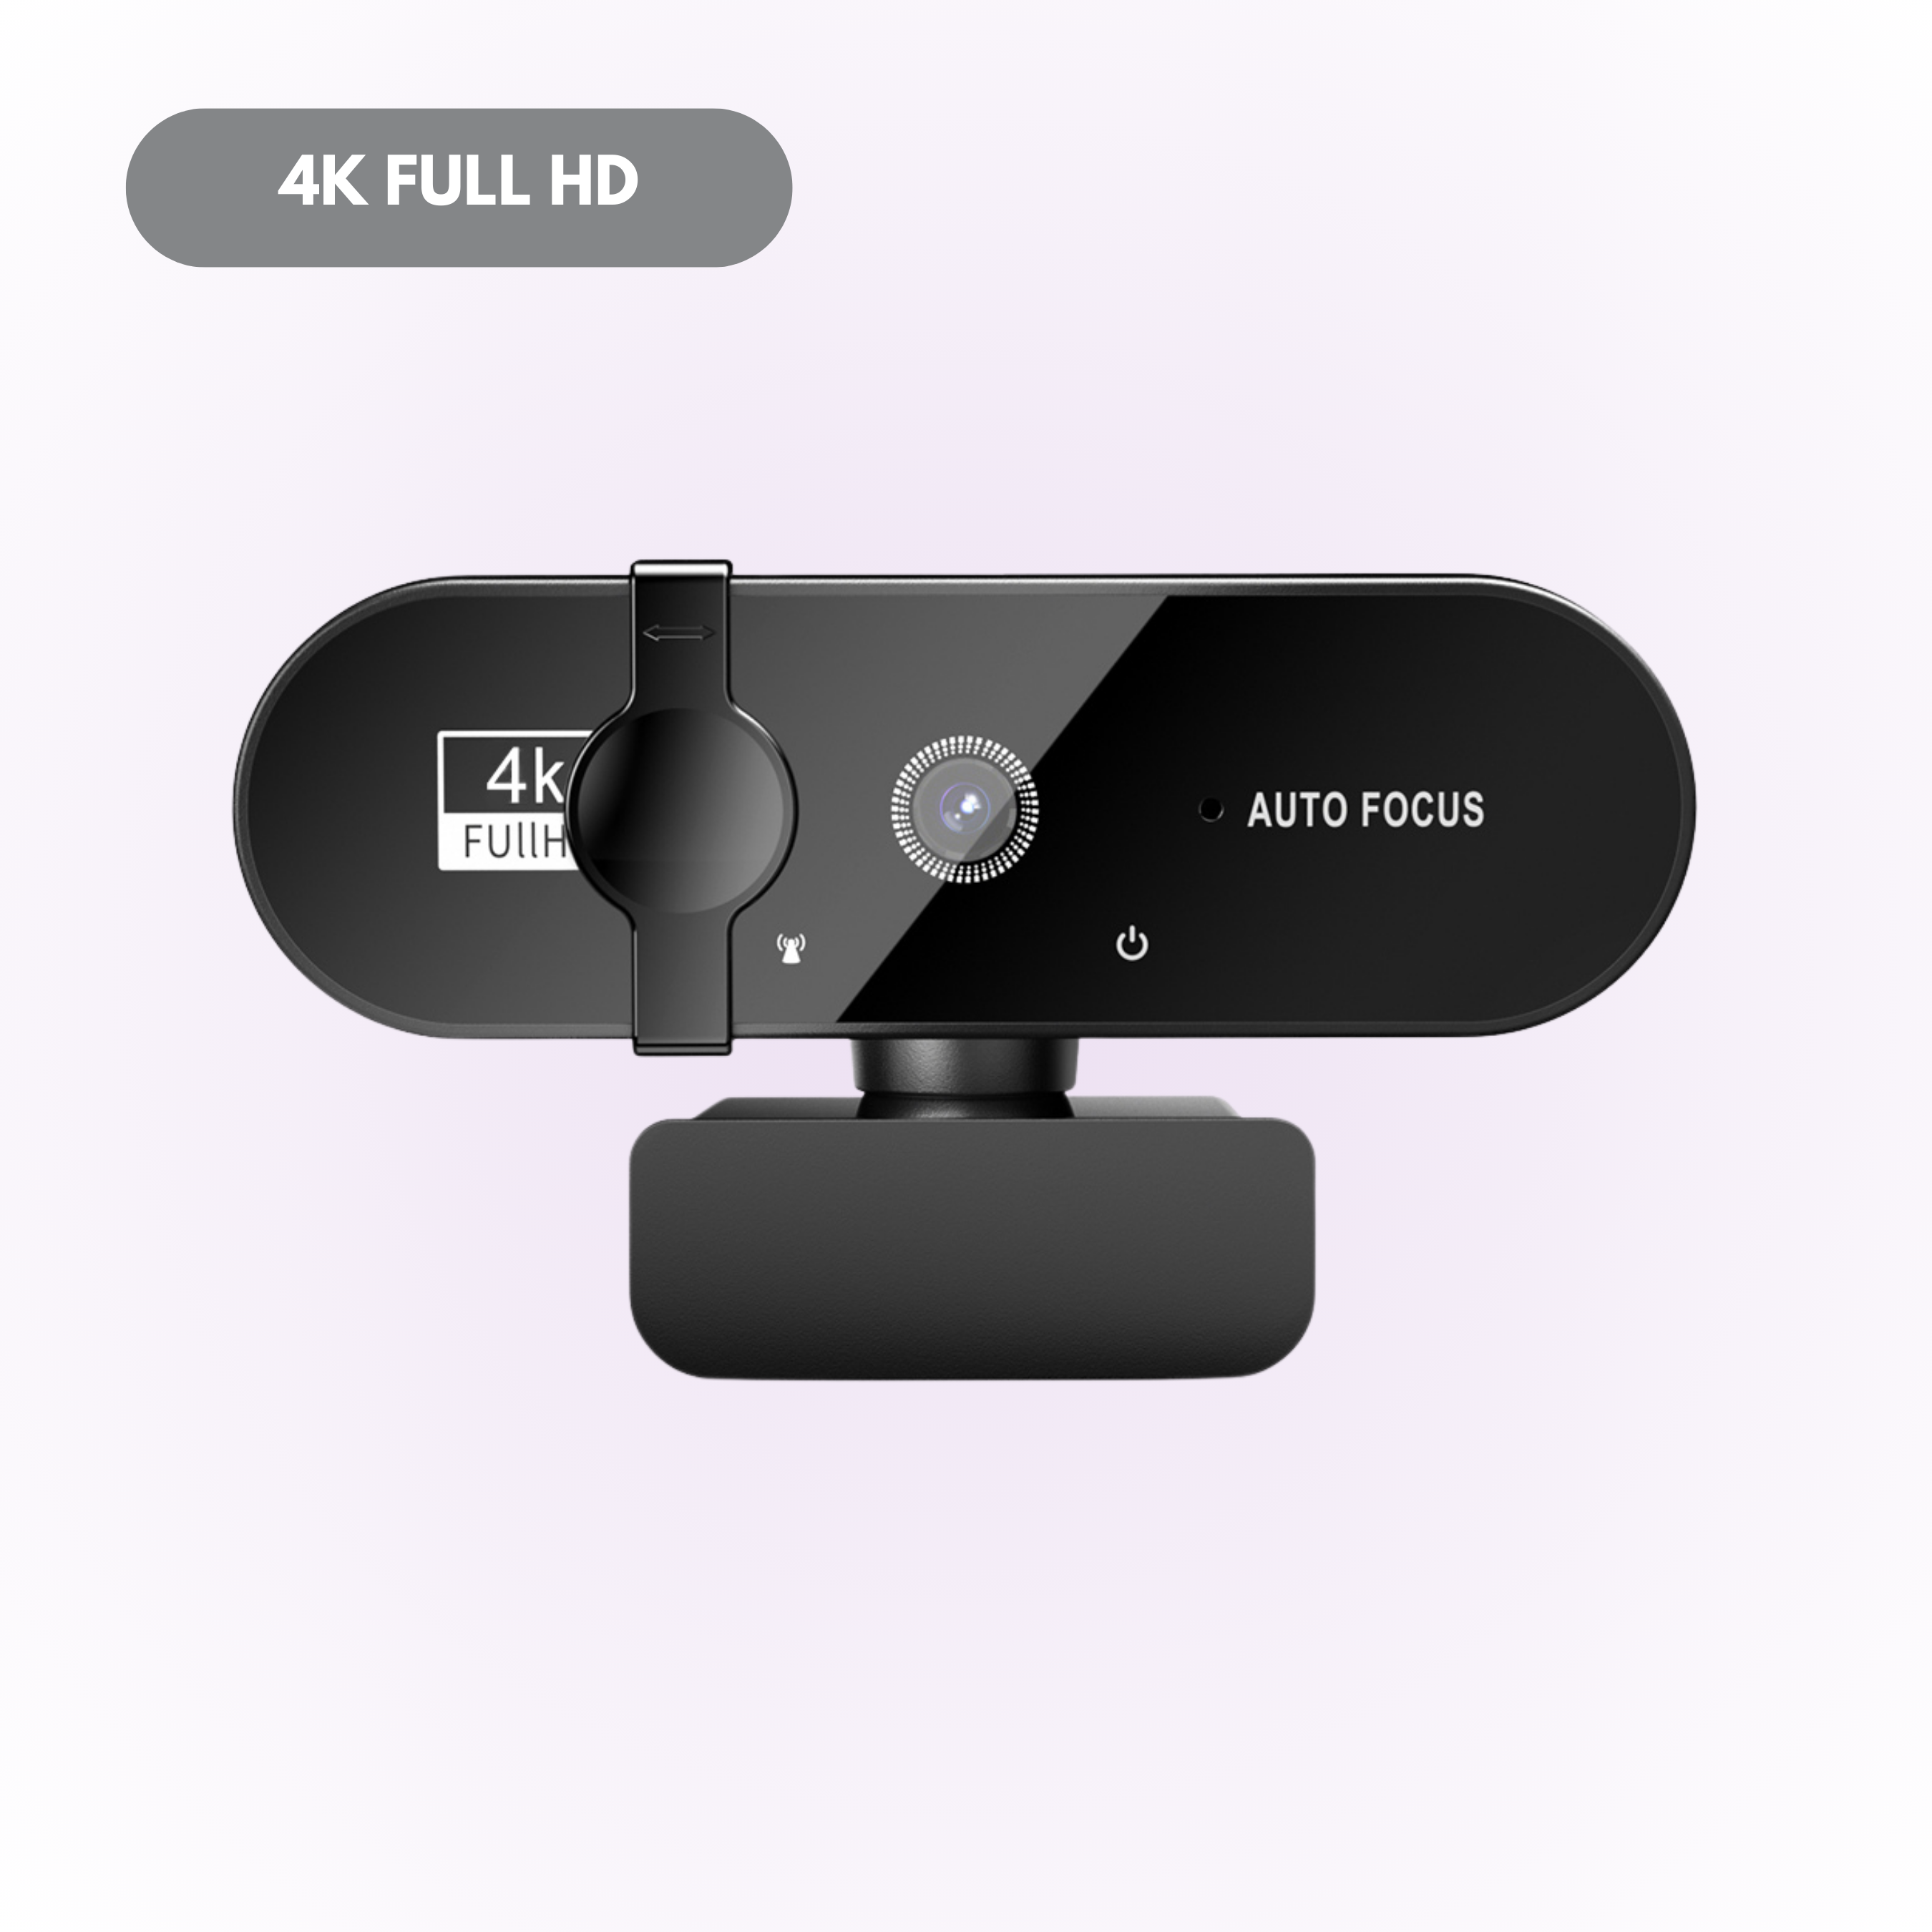 4k full hd Webcam with Built-in Microphone